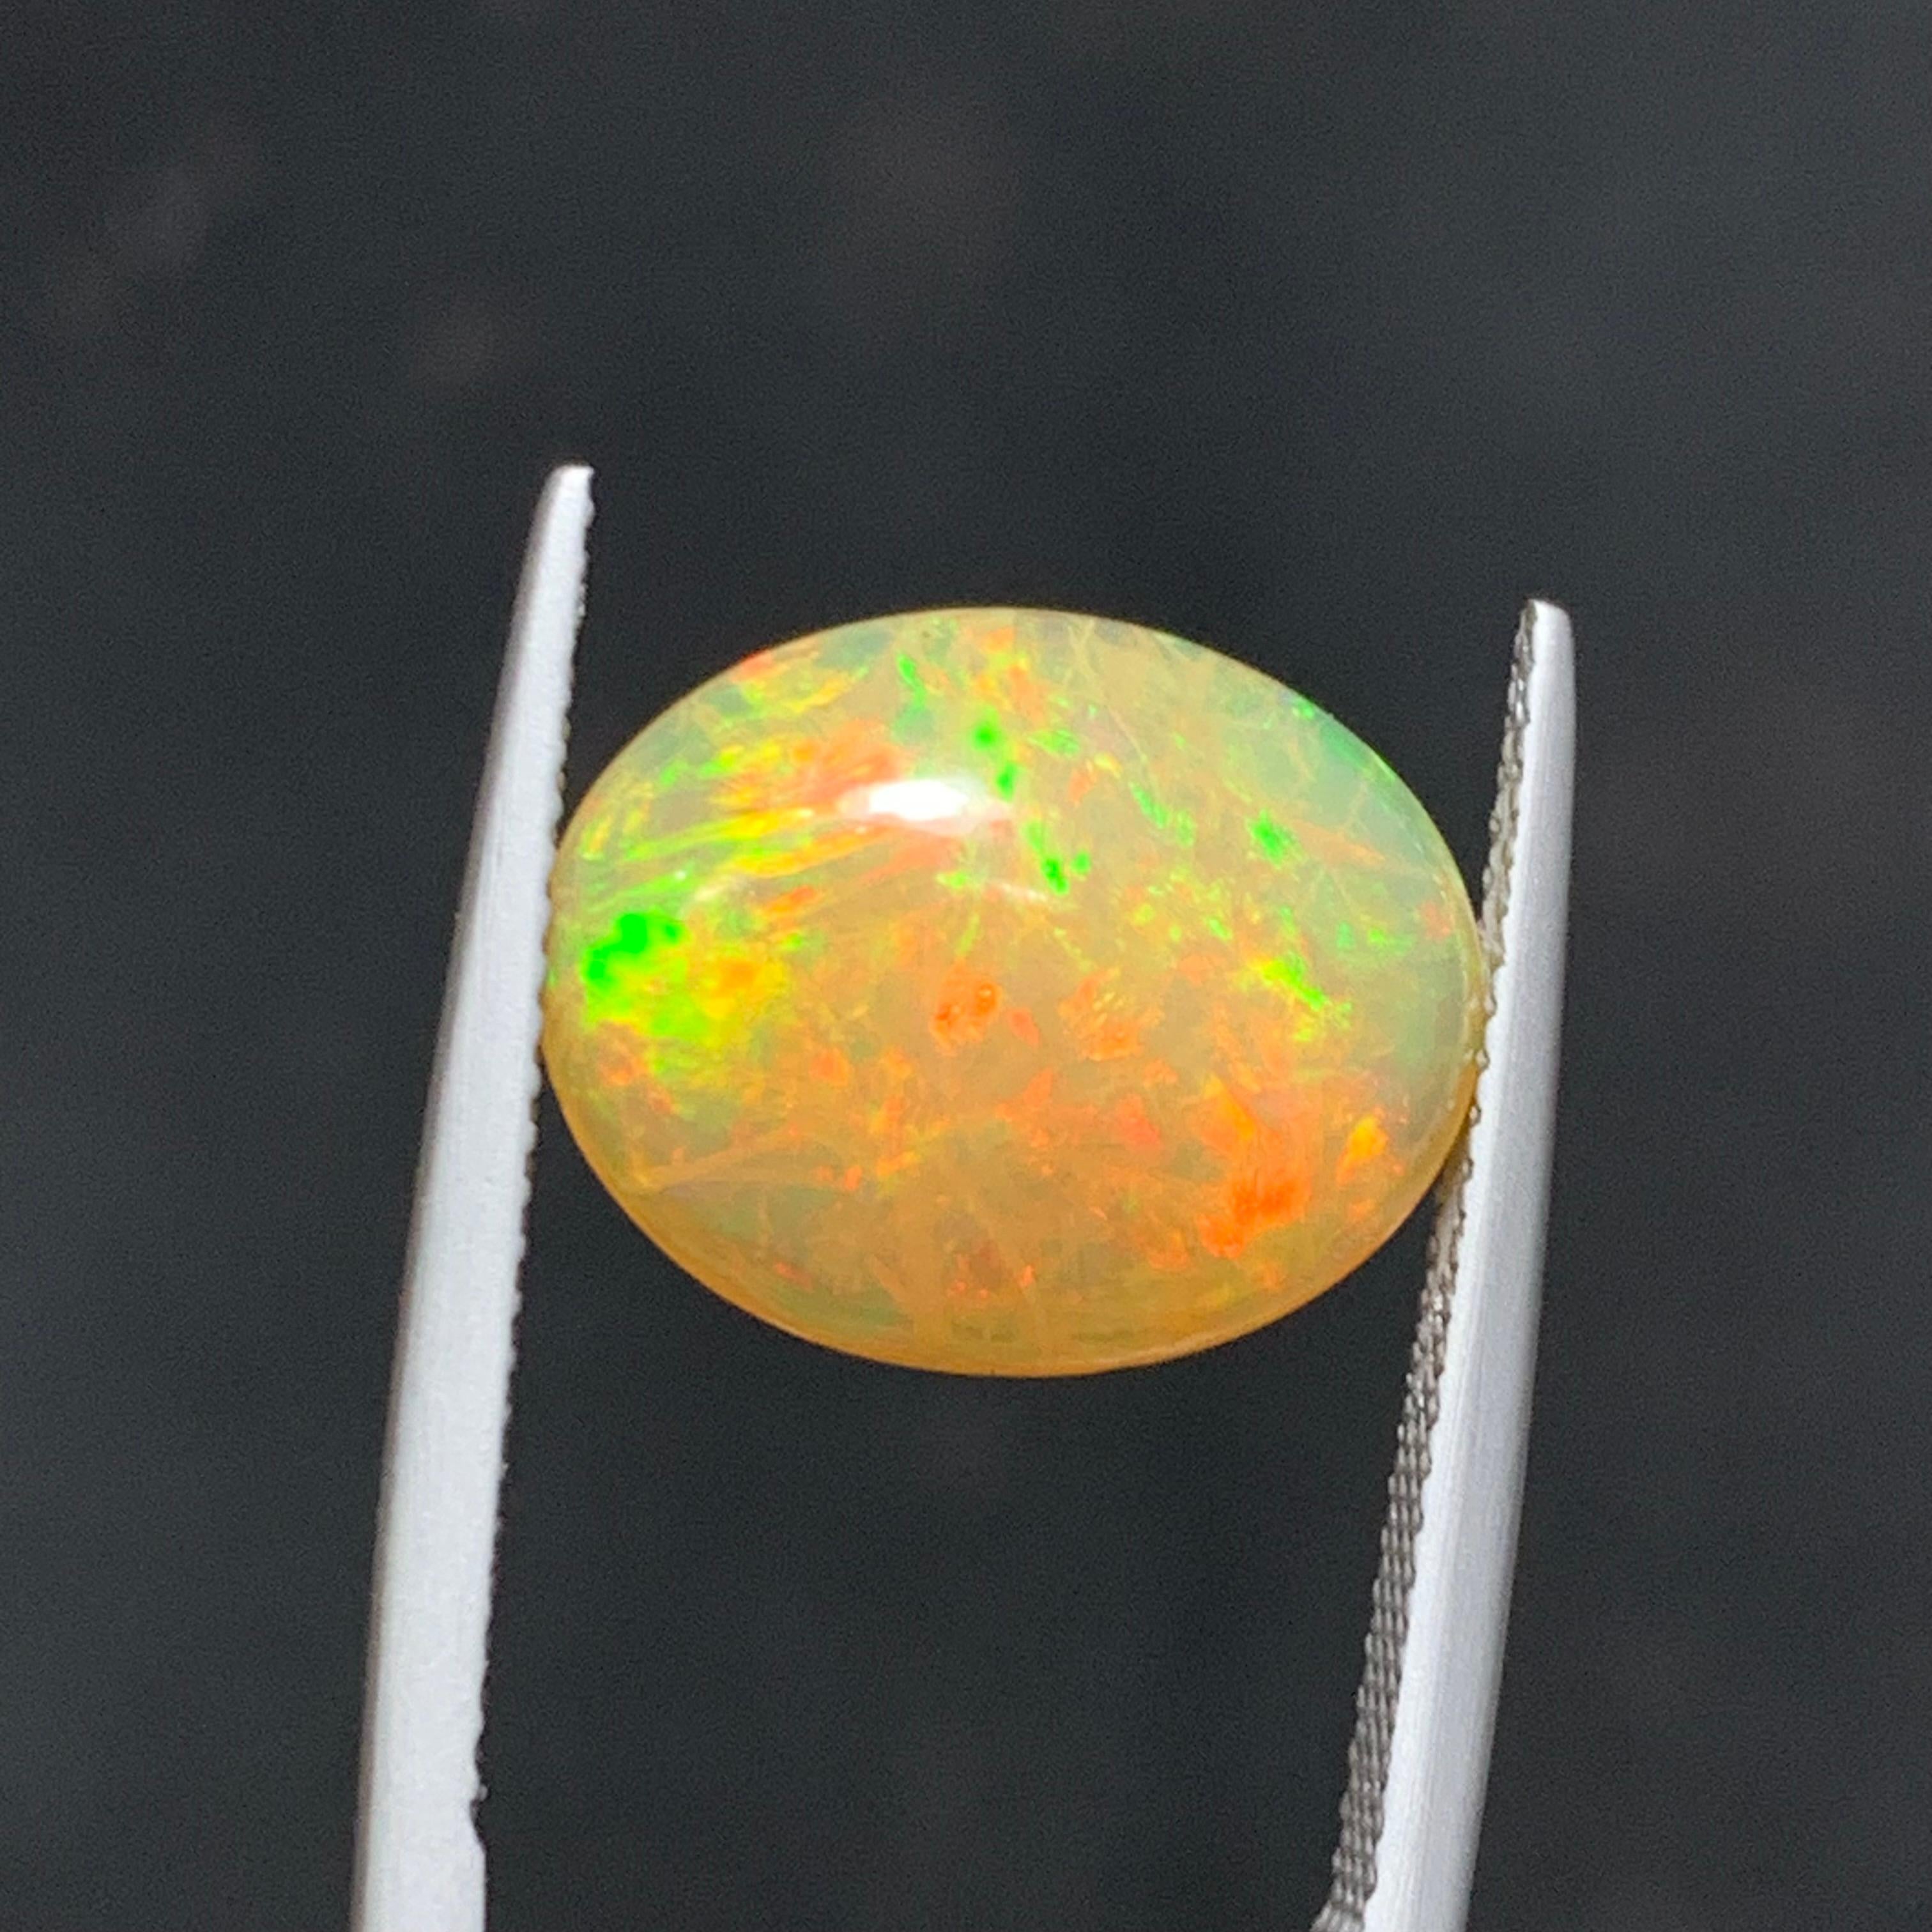 Rare Orange Creamy Natural Fire Opal Gemstone Cabochons, 20 Ct for Jewelry 5